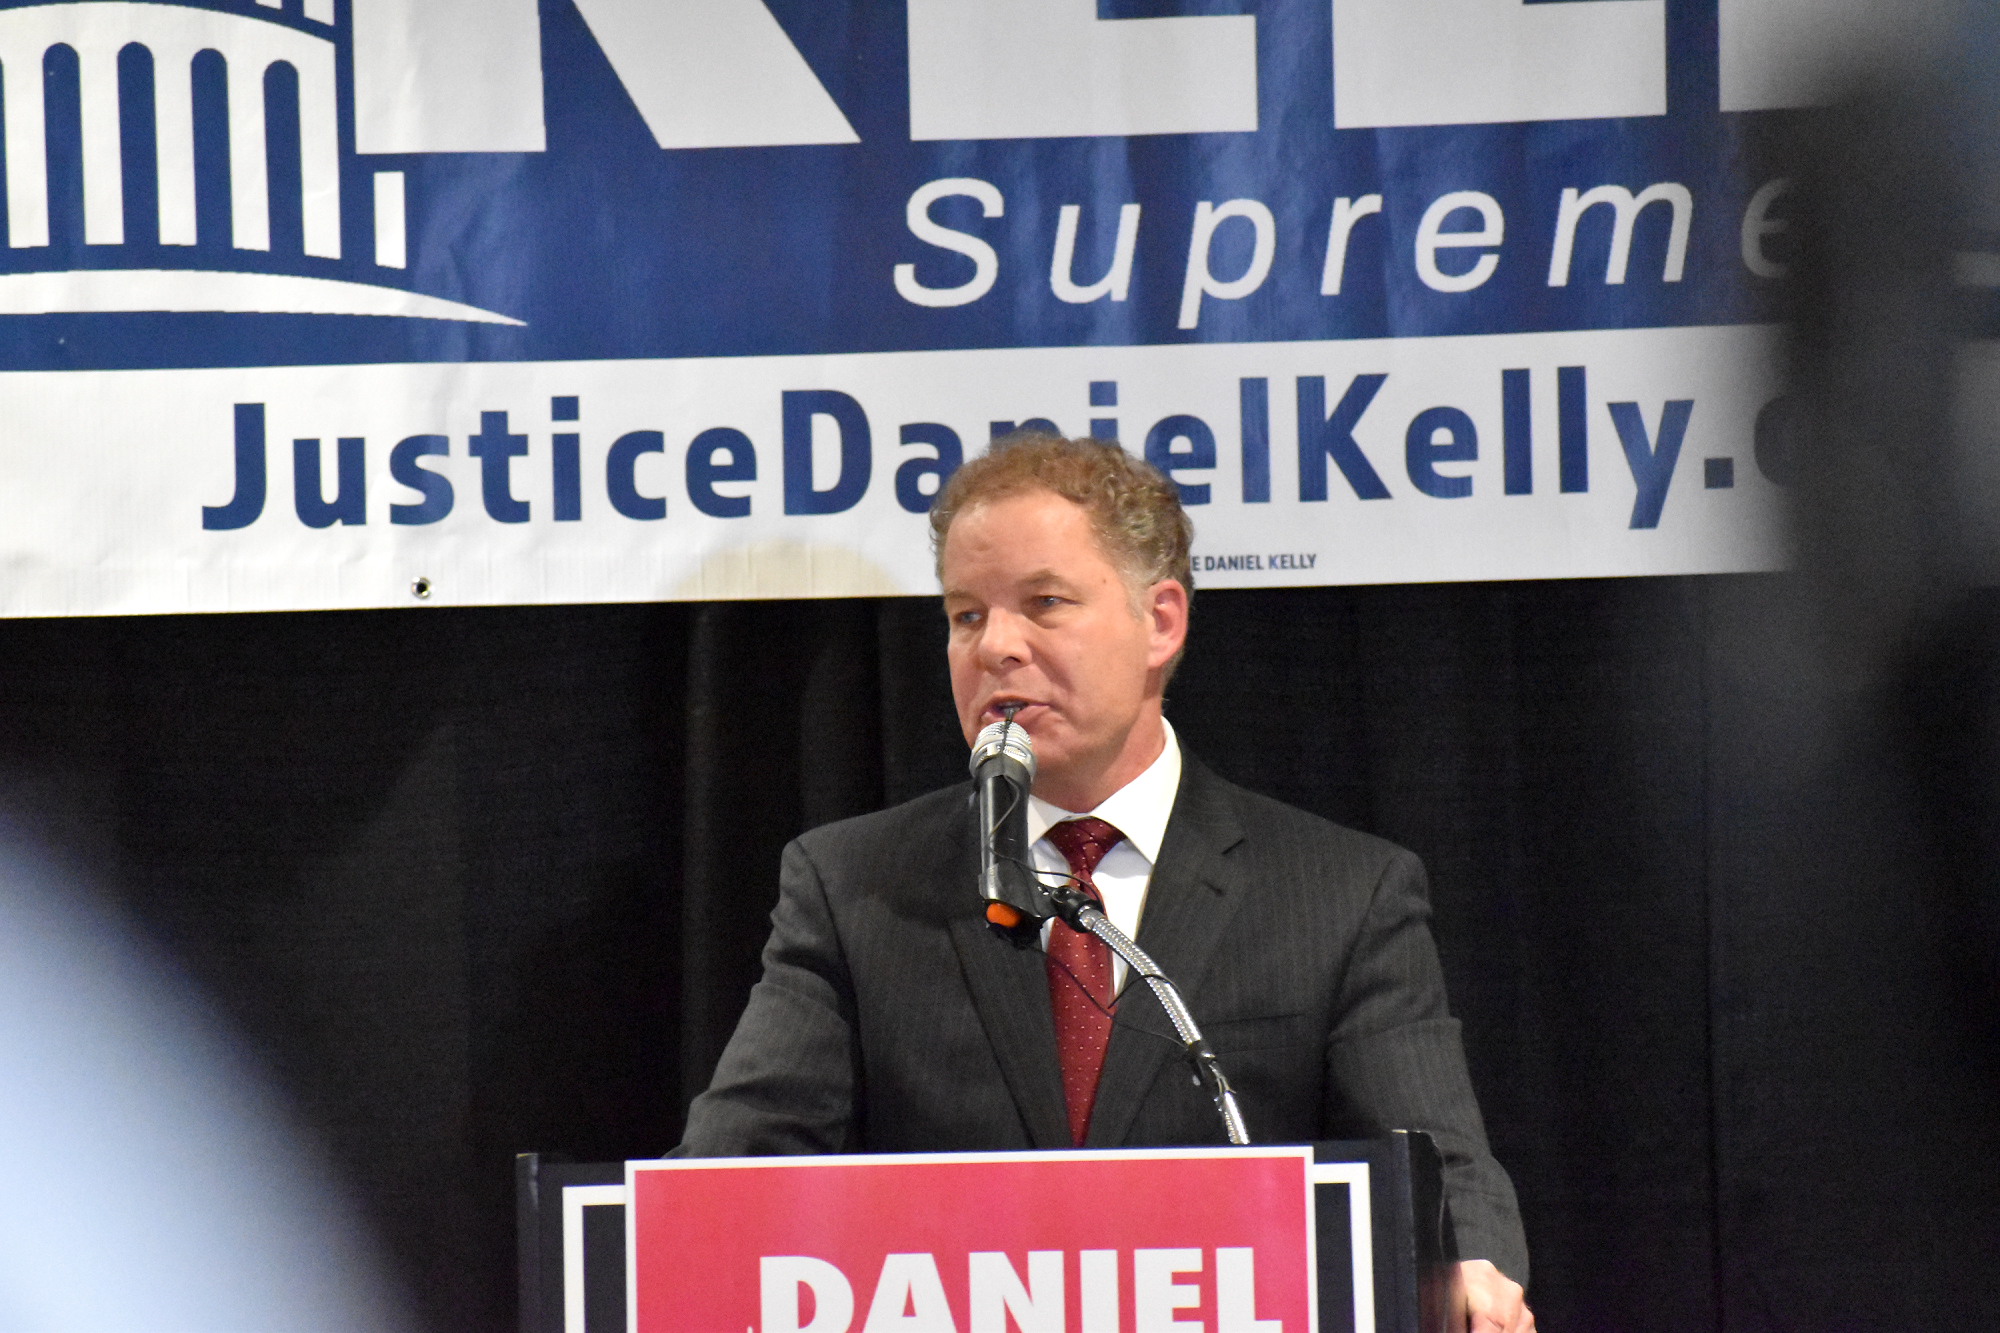 Supreme Court Candidate Daniel Kelly gives a concession speech